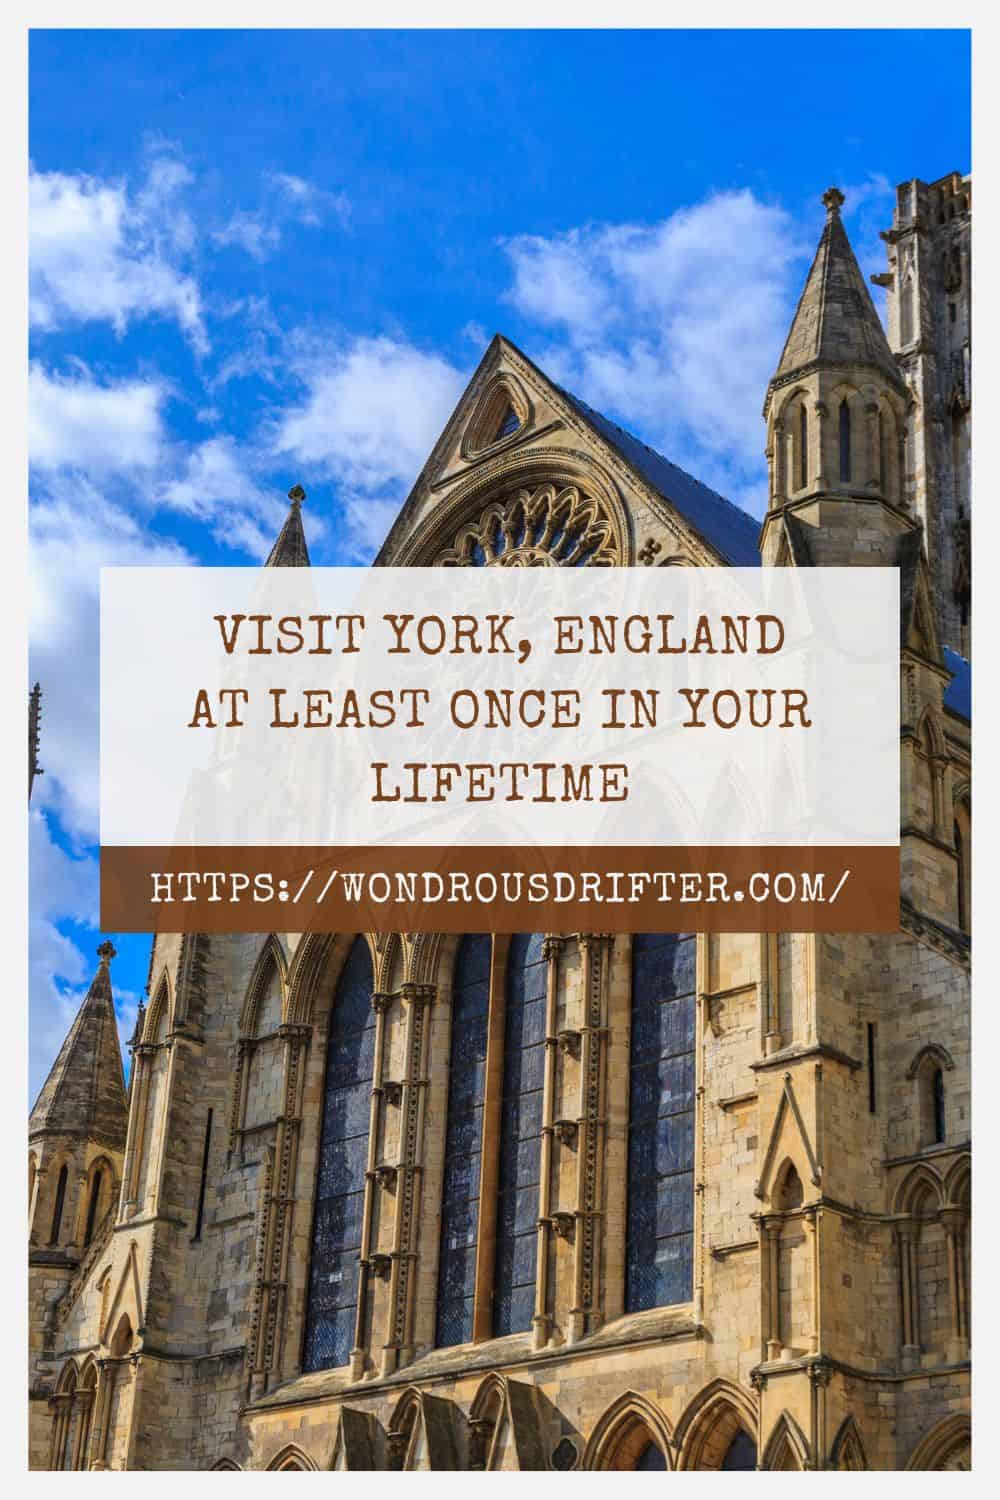 Visit York England at least once in your lifetime